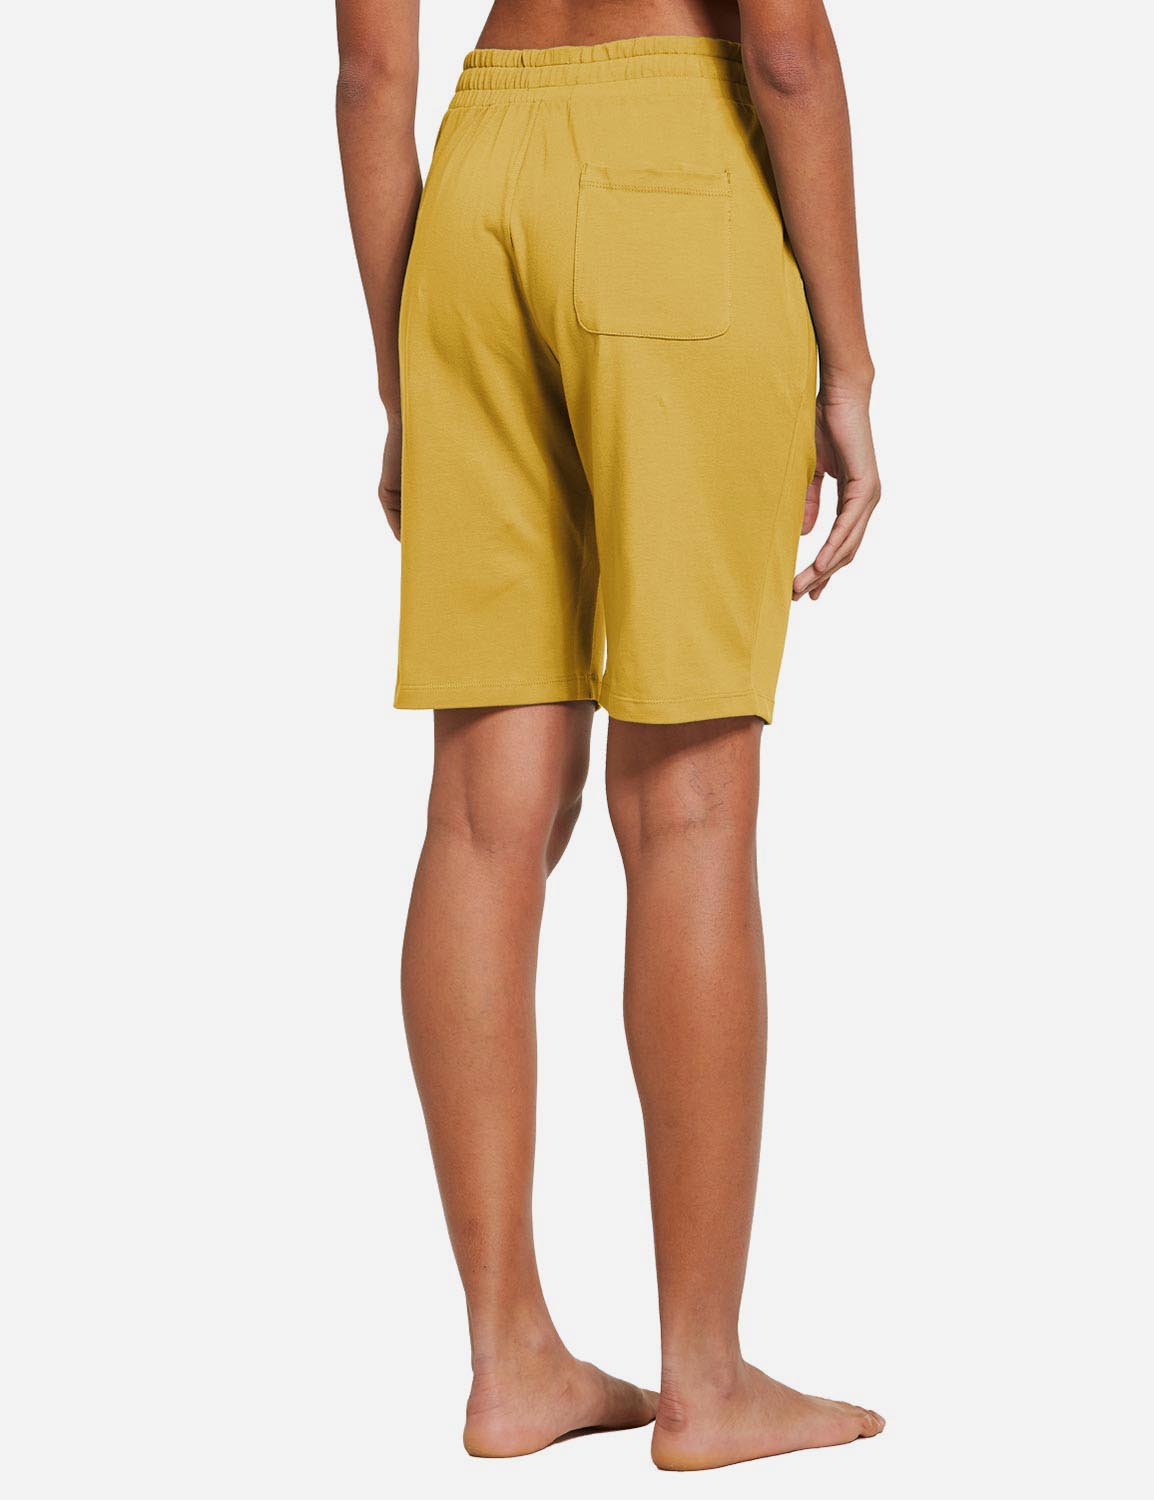 Baleaf Women's Mid-Rise Cotton Pocketed Bermuda Shorts abh104 Misted Yellow Back